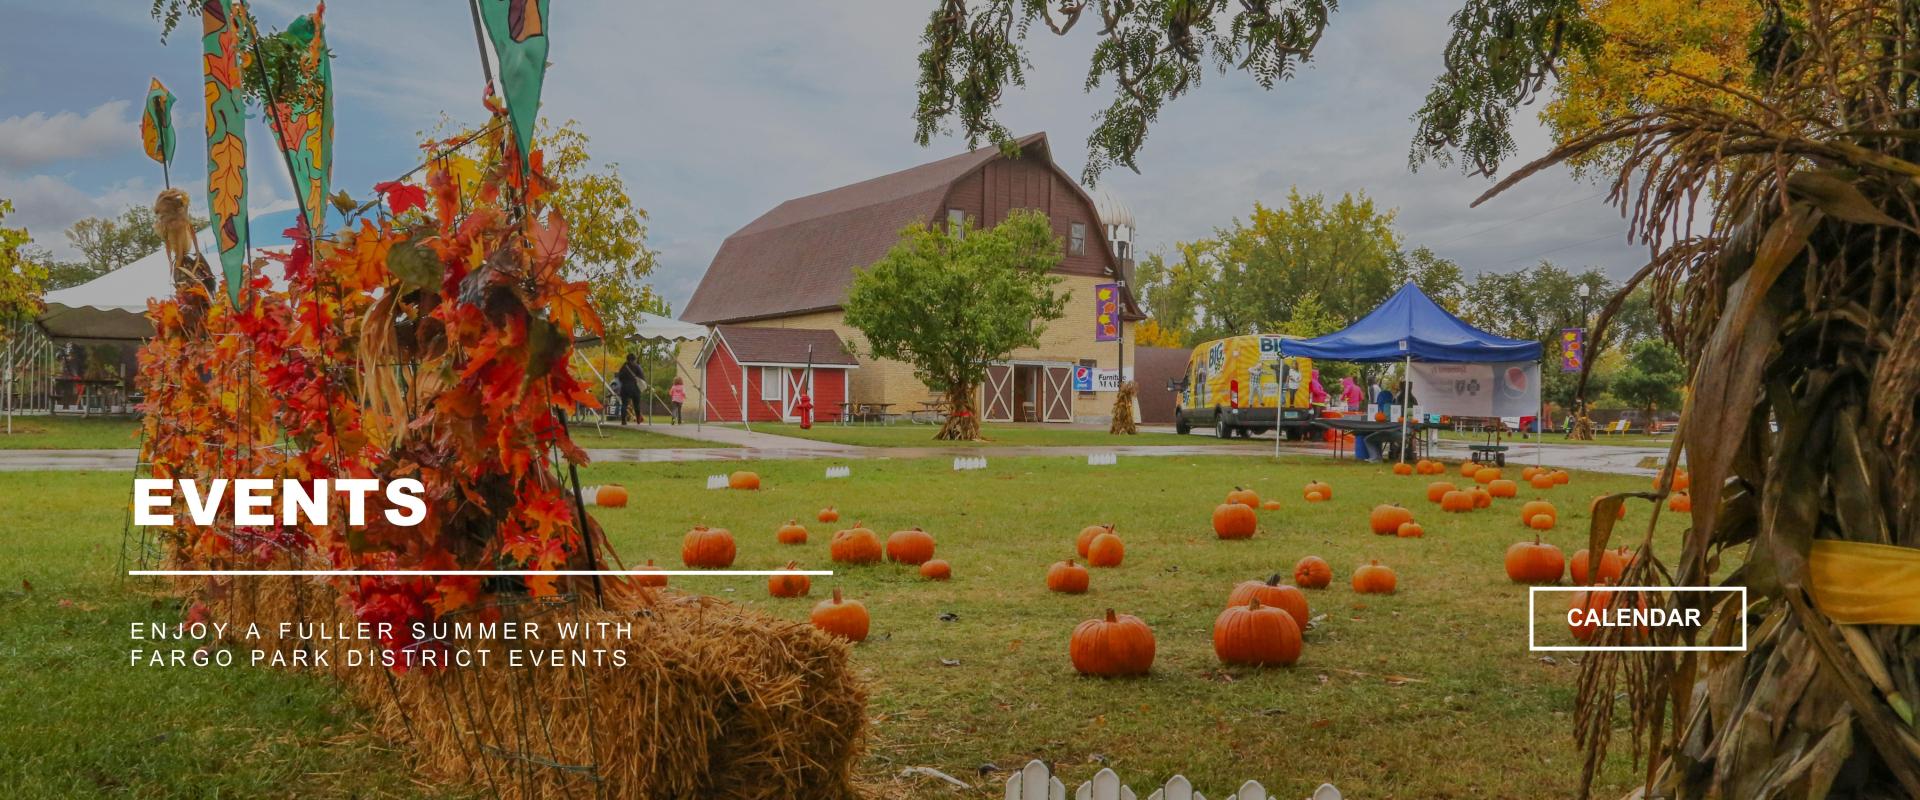 Image of Fall in Fargo with the Rheault Farm background and pumpkins and fall decor - EVENTS - CALENDAR button